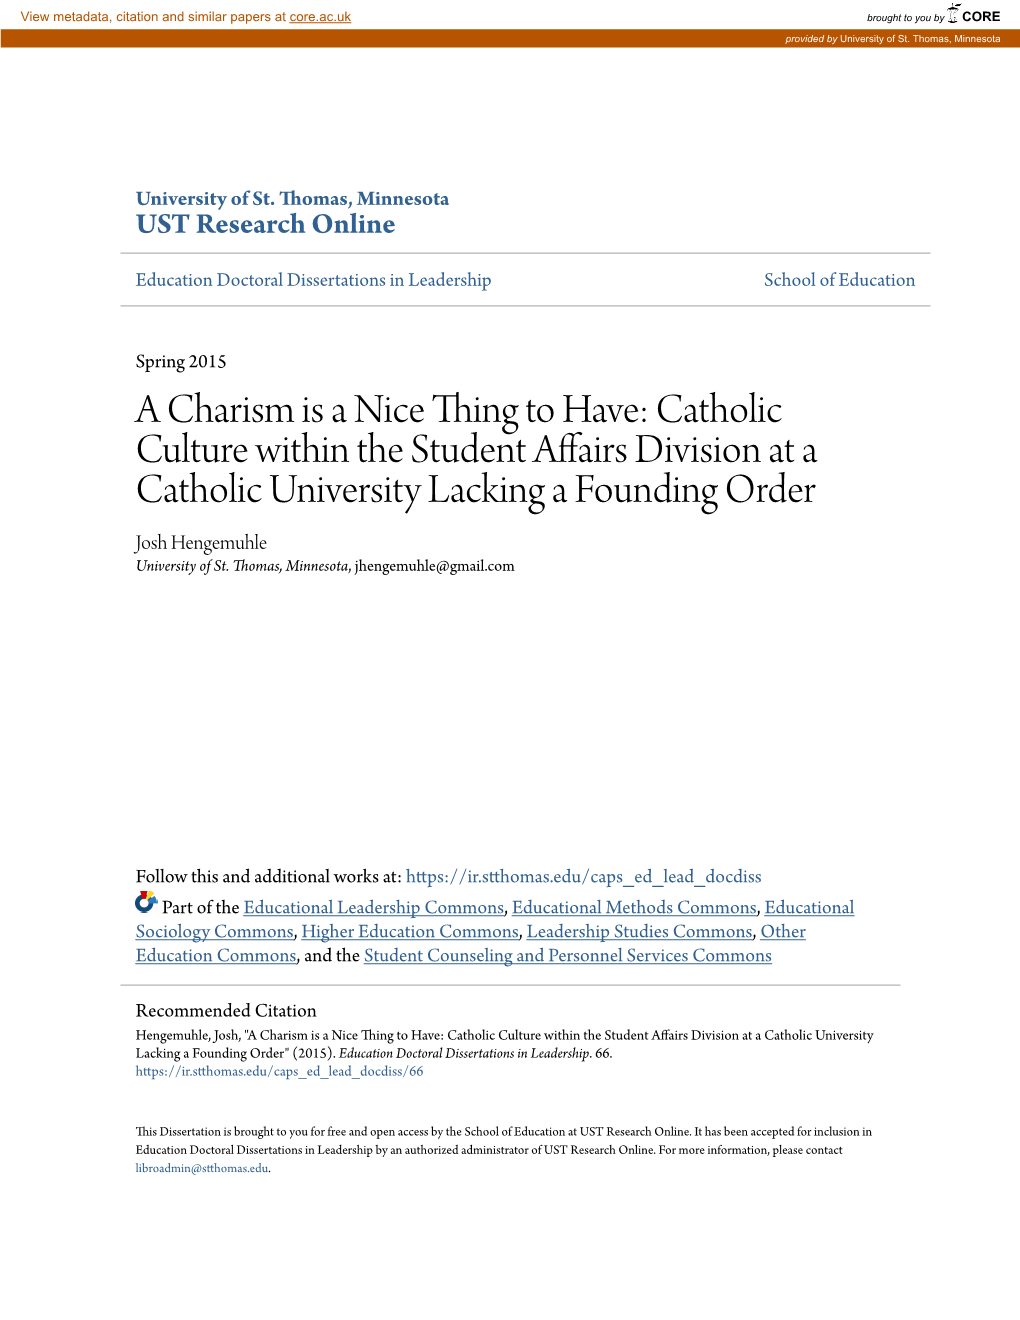 A Charism Is a Nice Thing to Have: Catholic Culture Within the Student